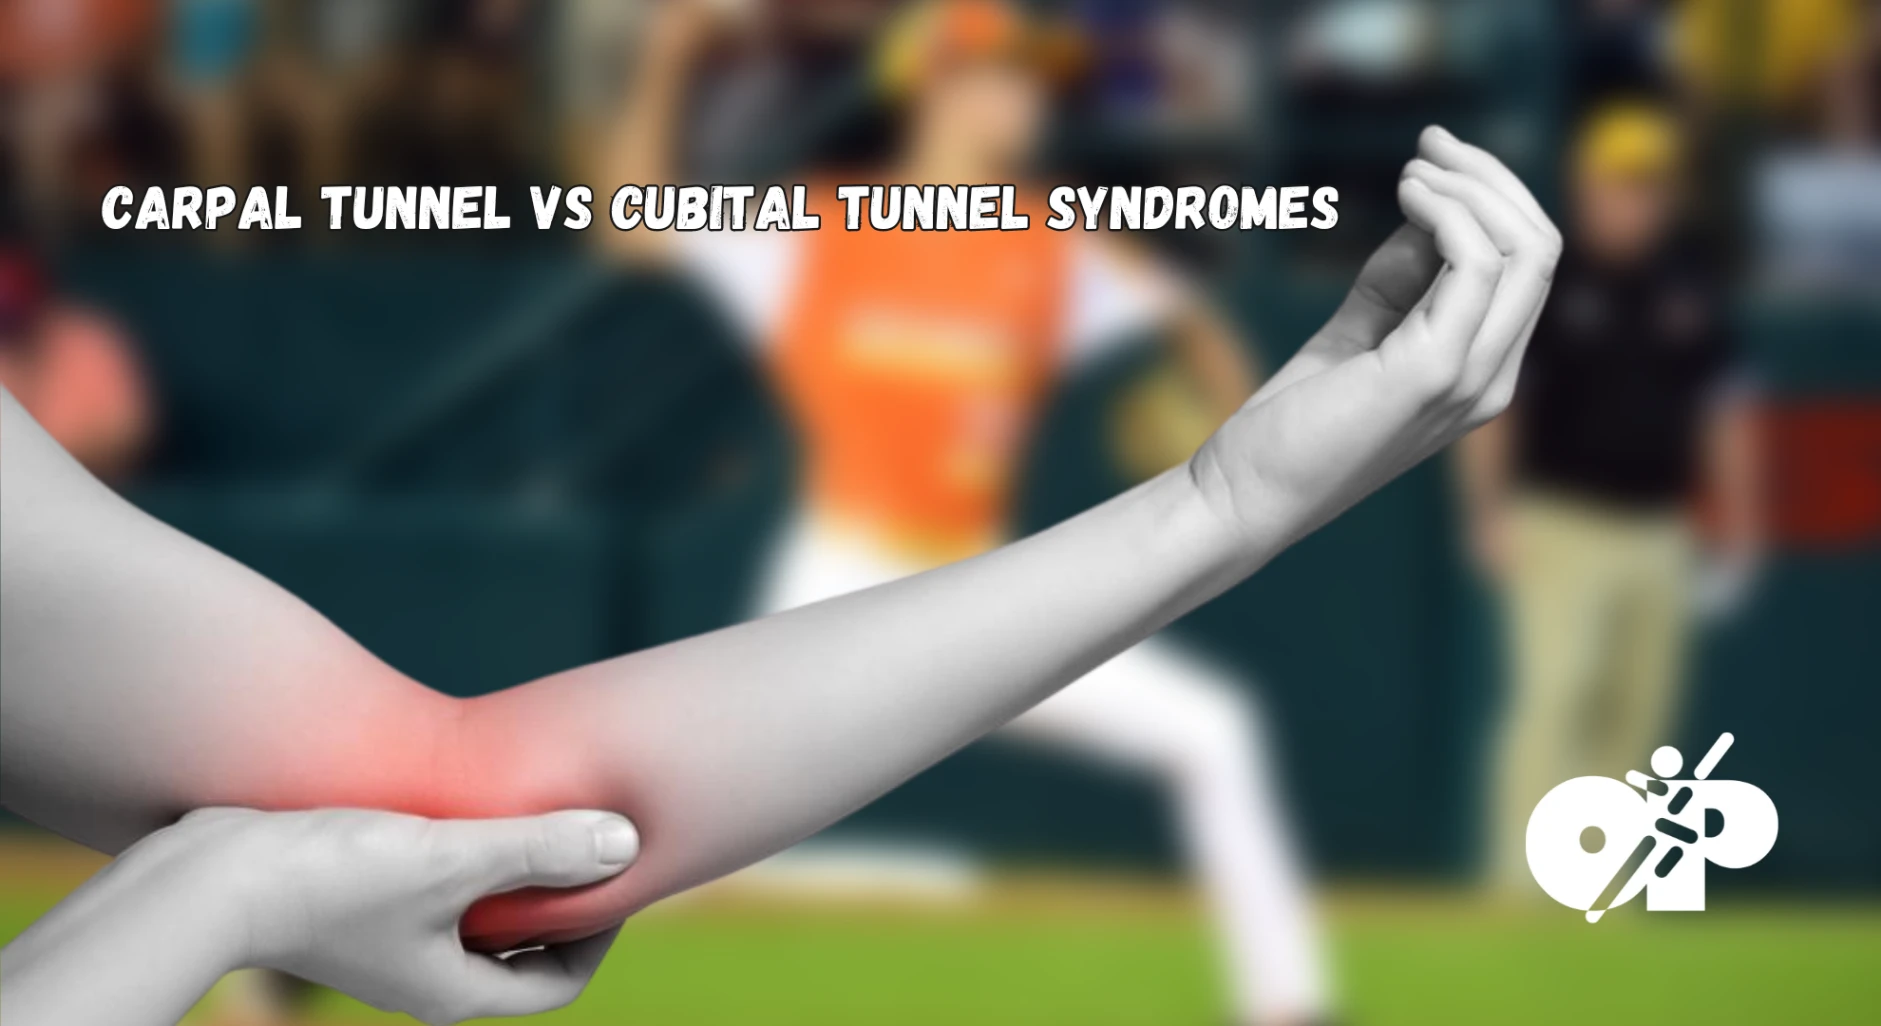 24. Introduction to Carpal Tunnel and Cubital Tunnel Syndromes